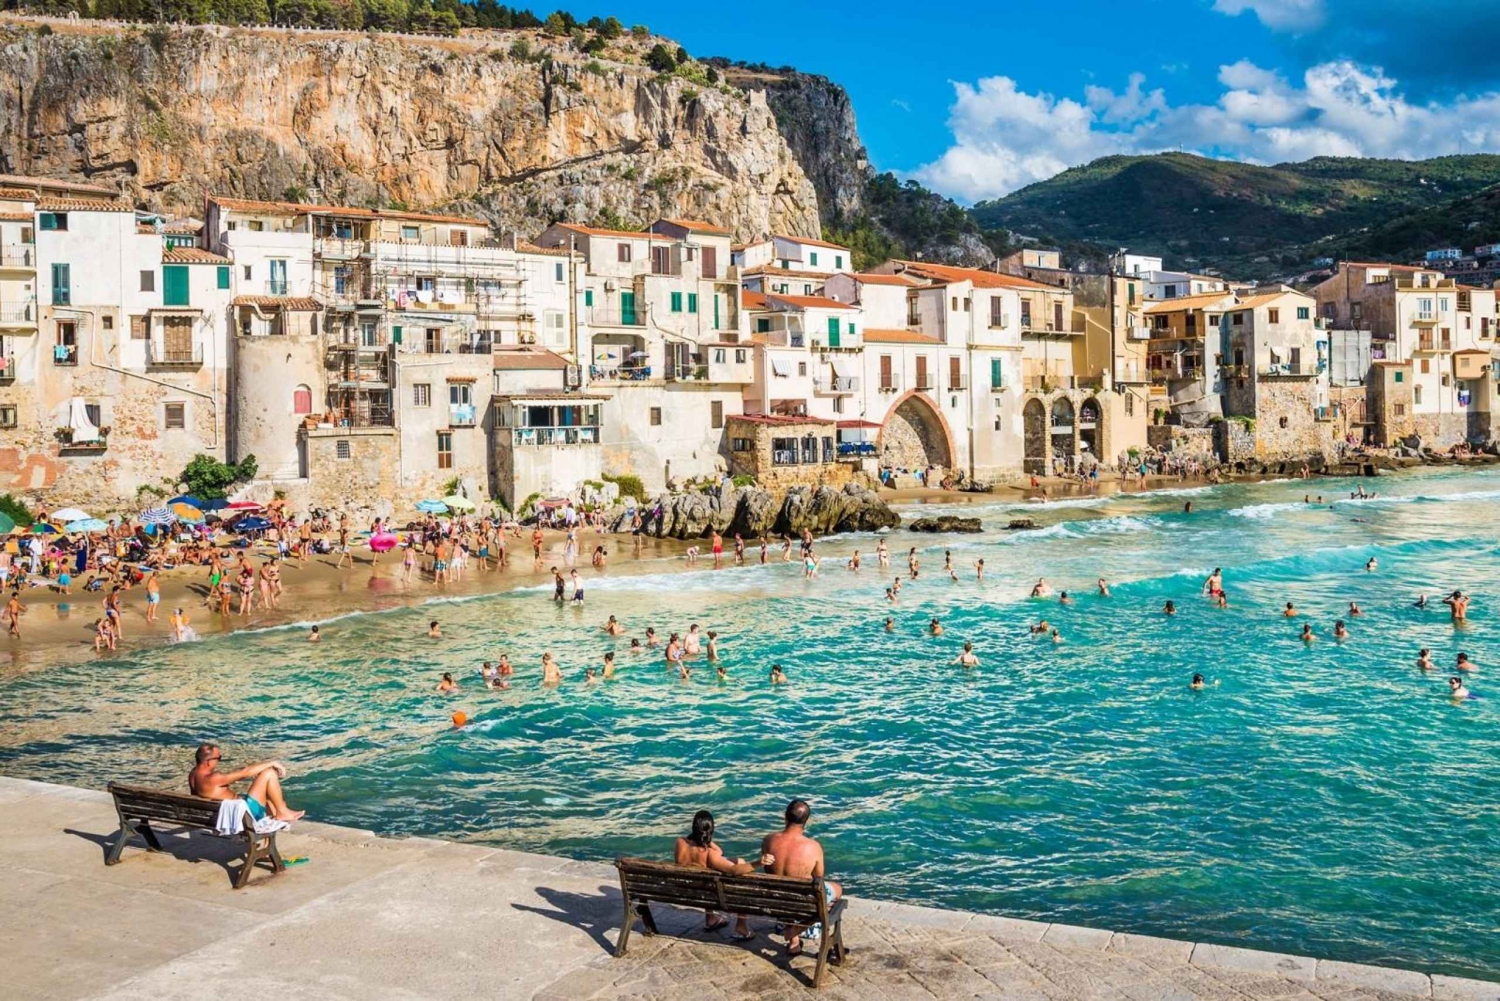 Cefalù Tour: Between history and natural beauty